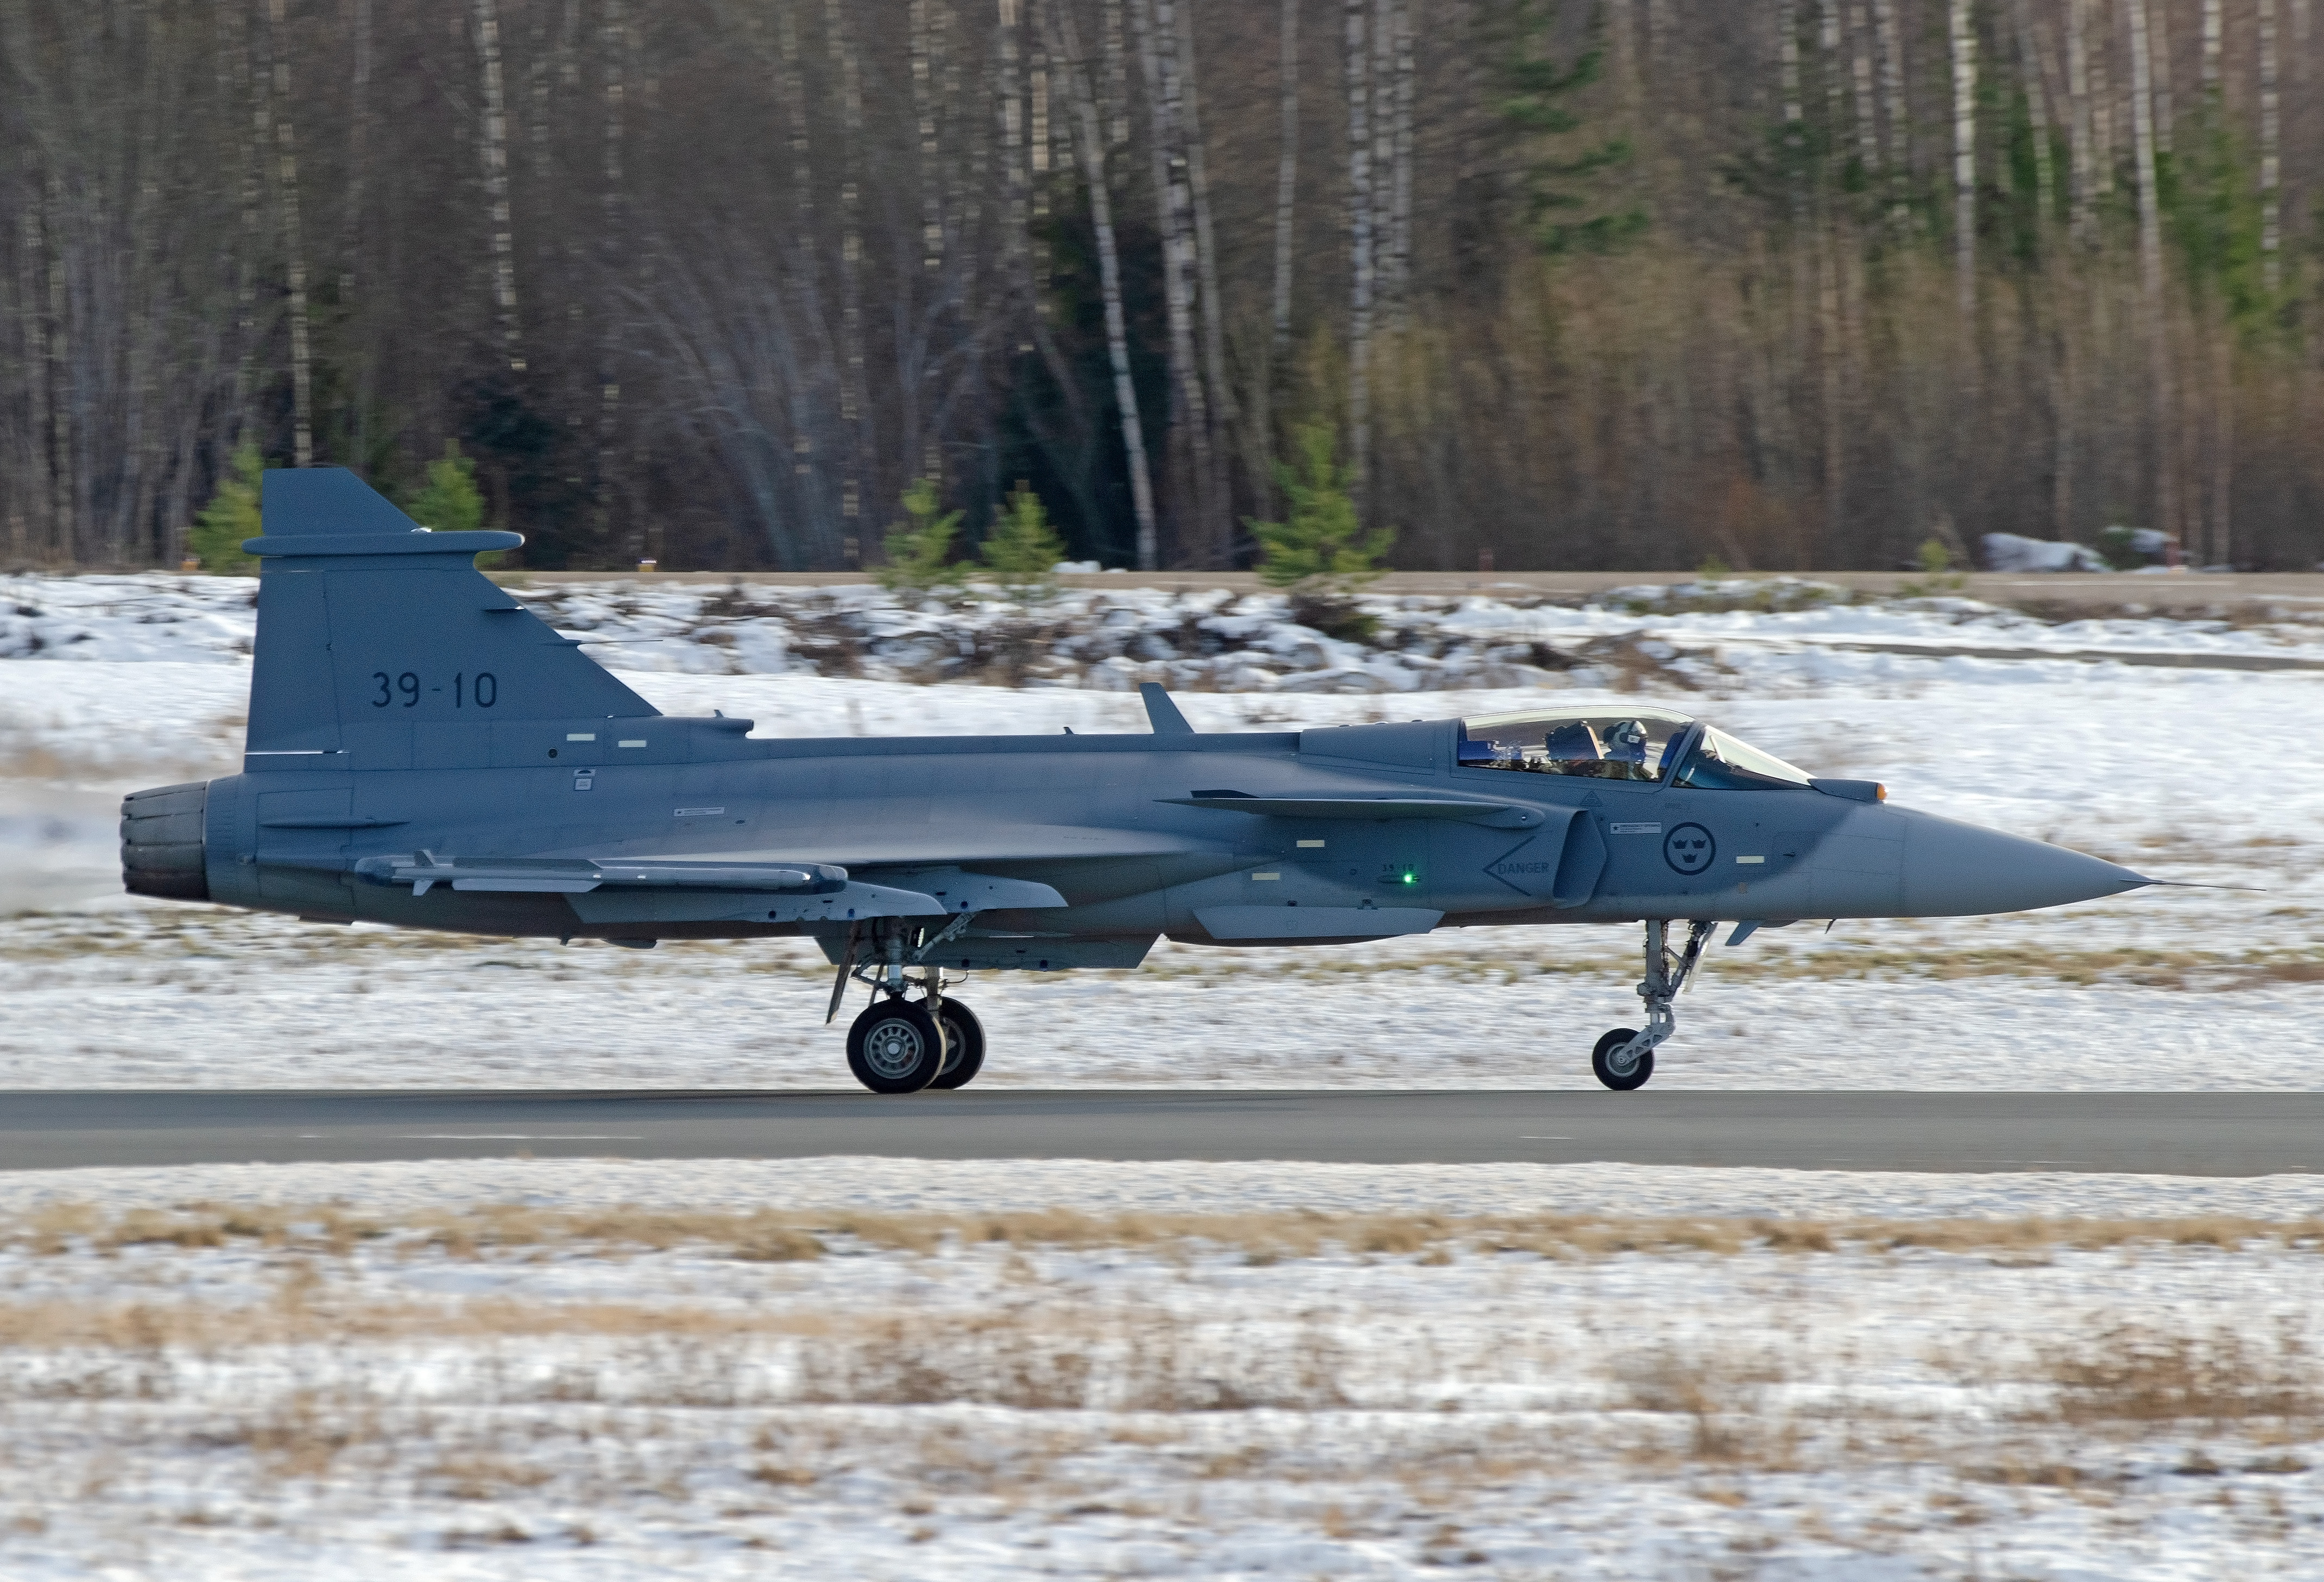 Saab JAS 39 Gripen E multirole fighter aircraft in Finland for the HX Challenge